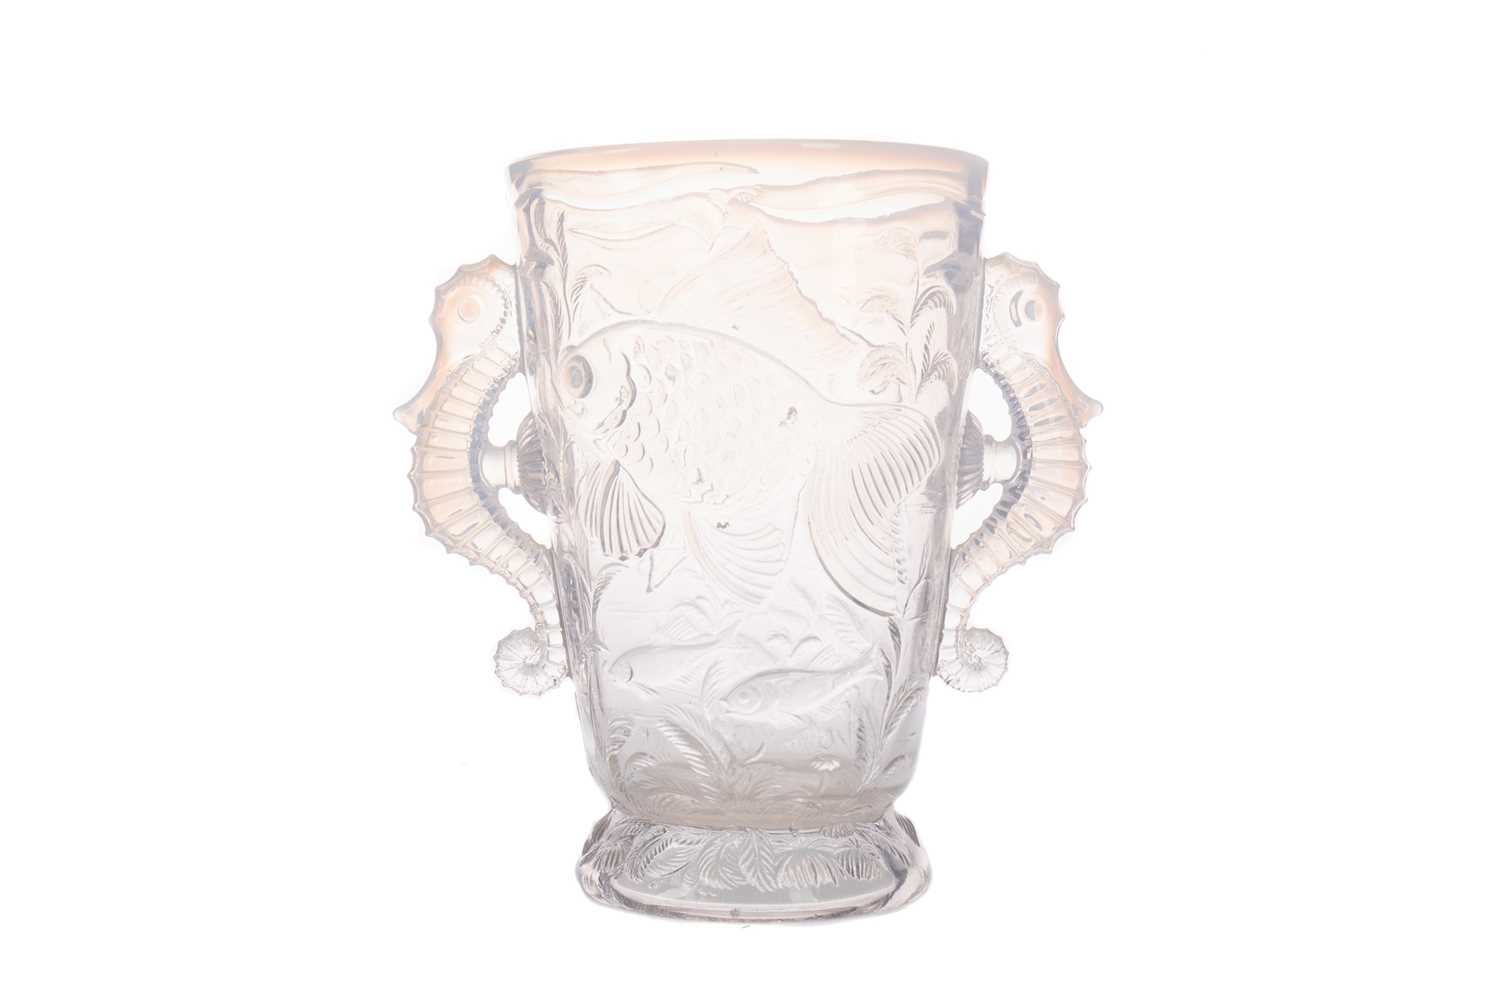 Lot 1026 - AN EARLY 20TH CENTURY OPALESCENT GLASS VASE